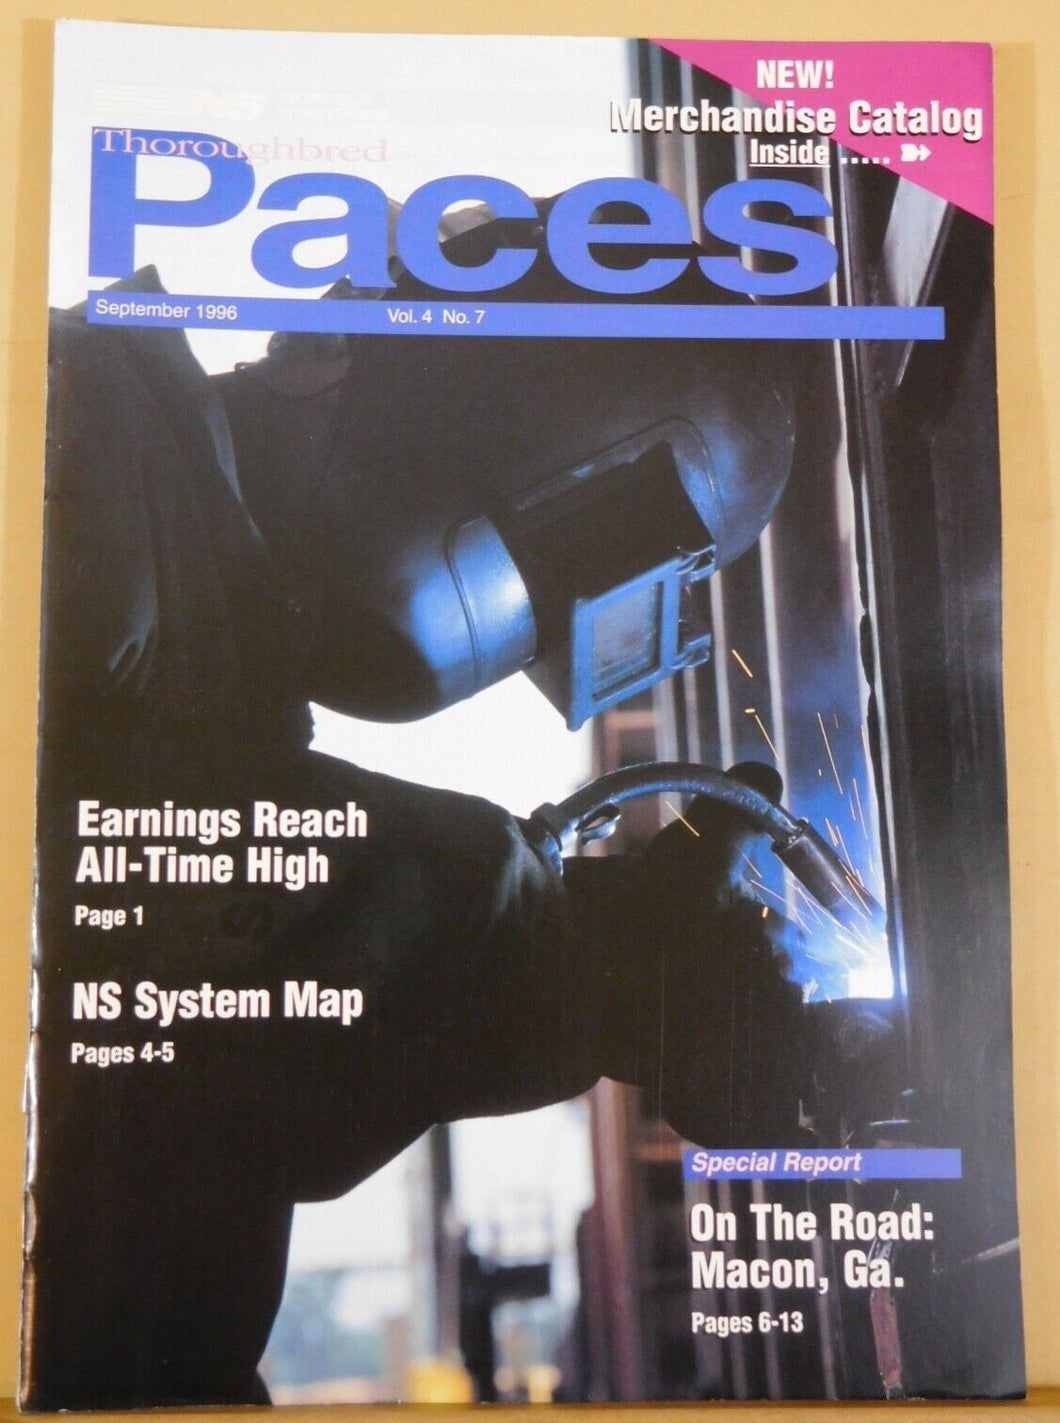 Norfolk Southern Thoroughbred Paces Employee Magazine Vol 4 #7 1996 September